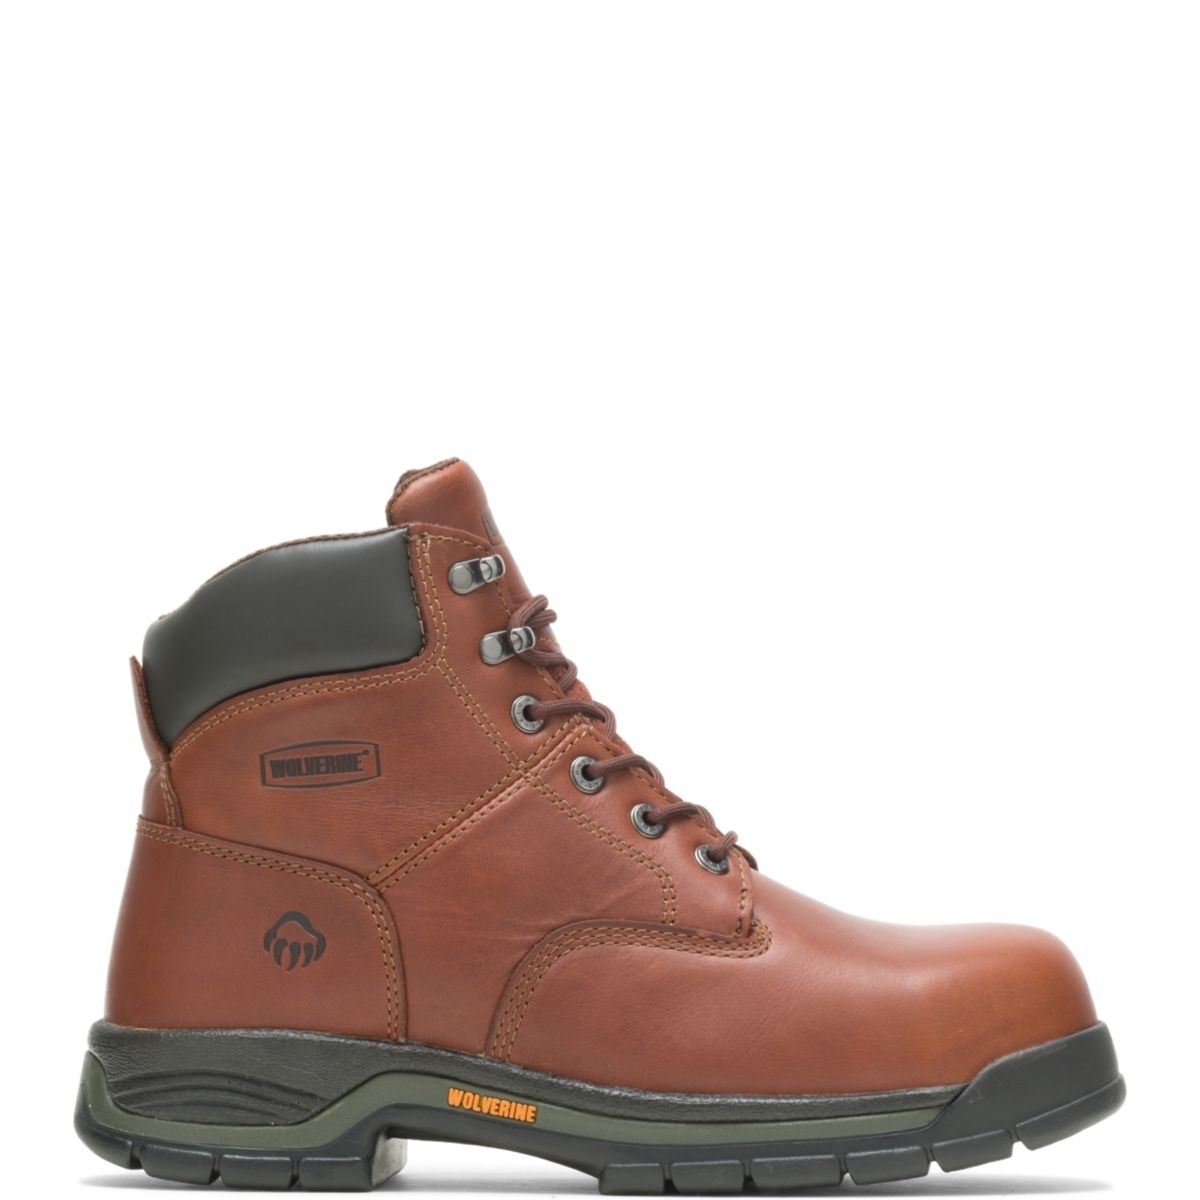 WOLVERINE Men's Harrison 6 Lace-Up SoftToe Work Boot Brown - W04906 Varies BROWN - BROWN, 7.5